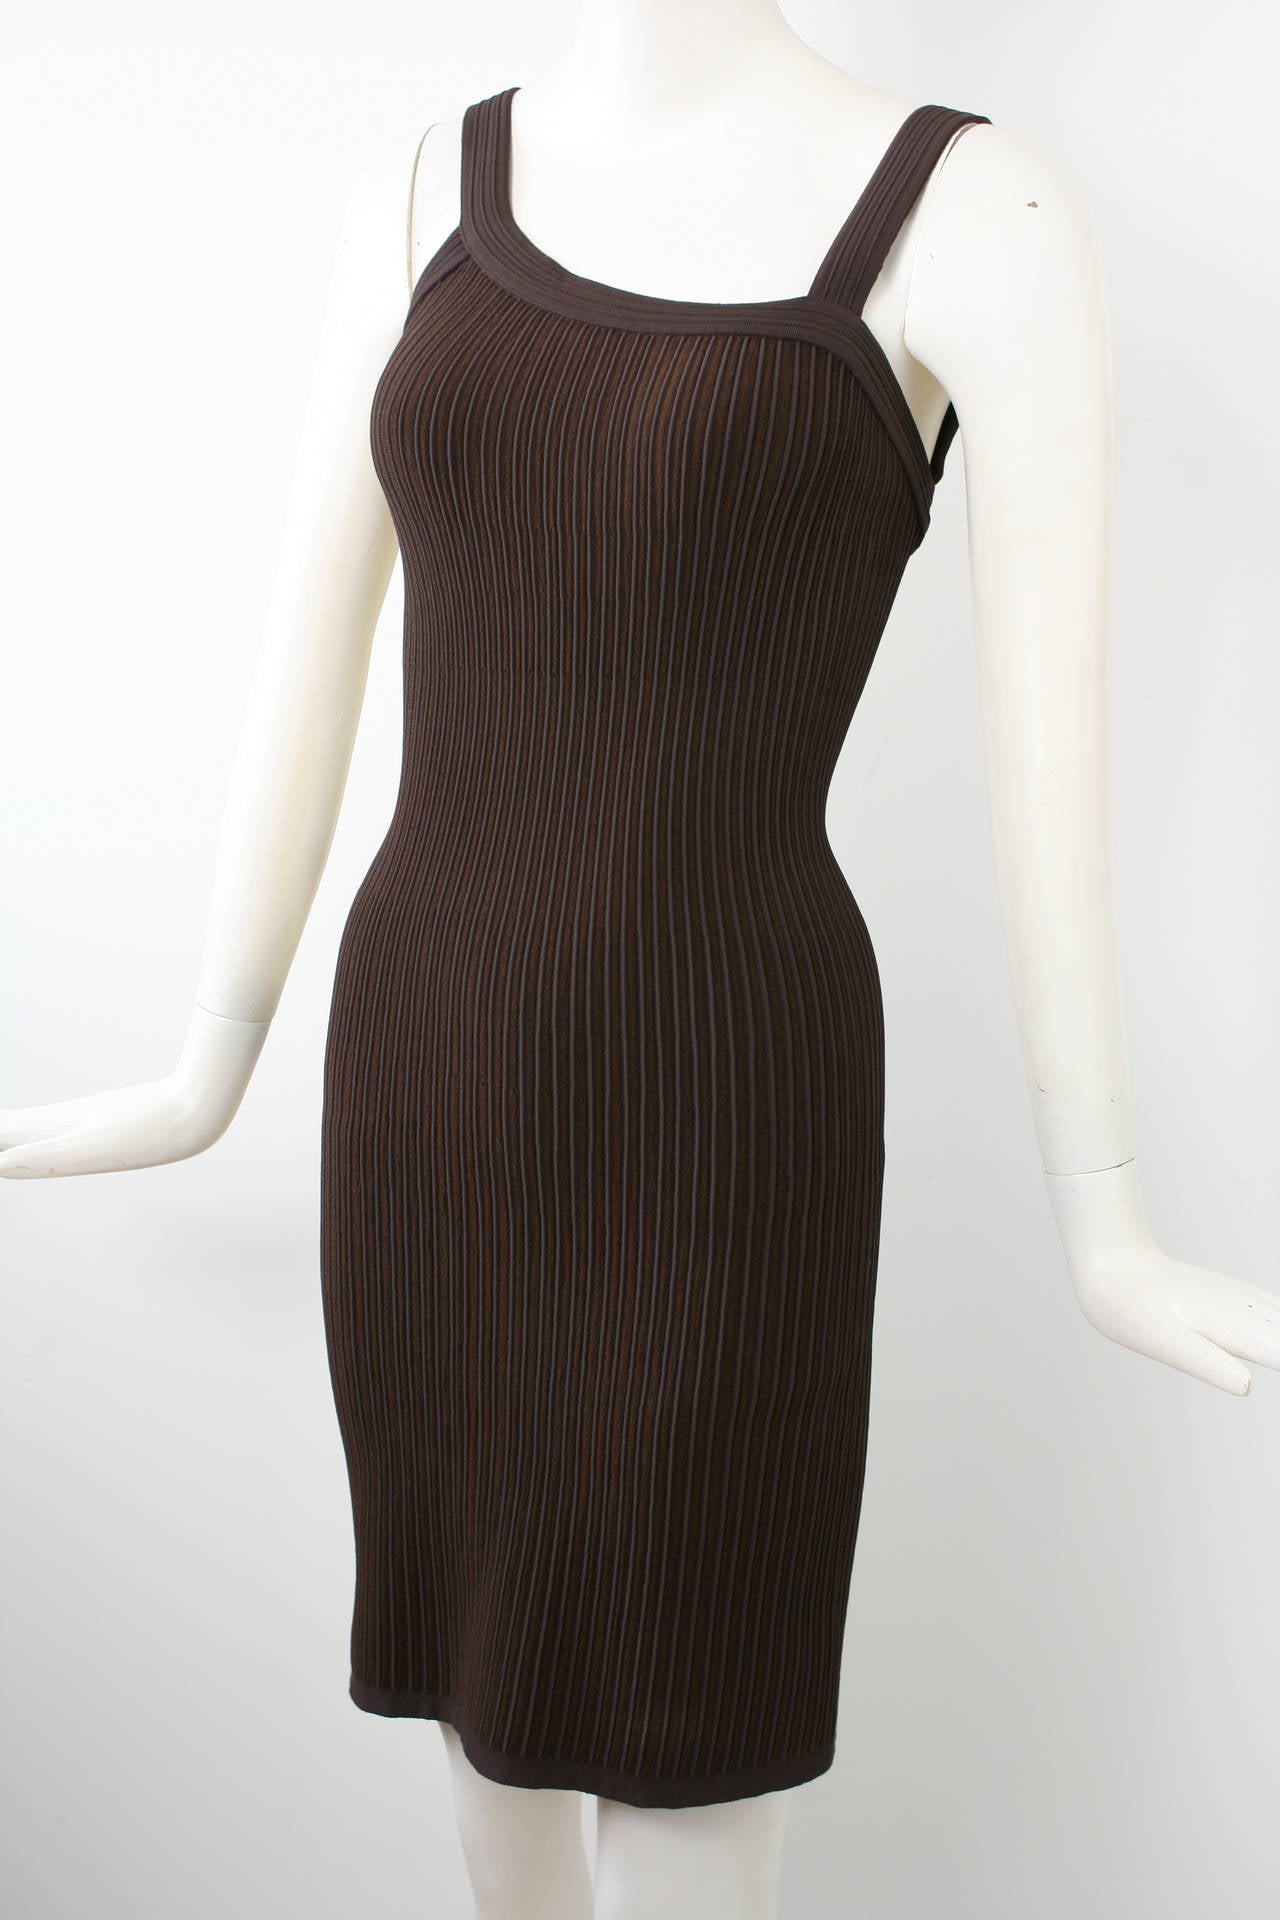 Alaia Sexy Little Dress with Asymmetrical Neckline For Sale 3